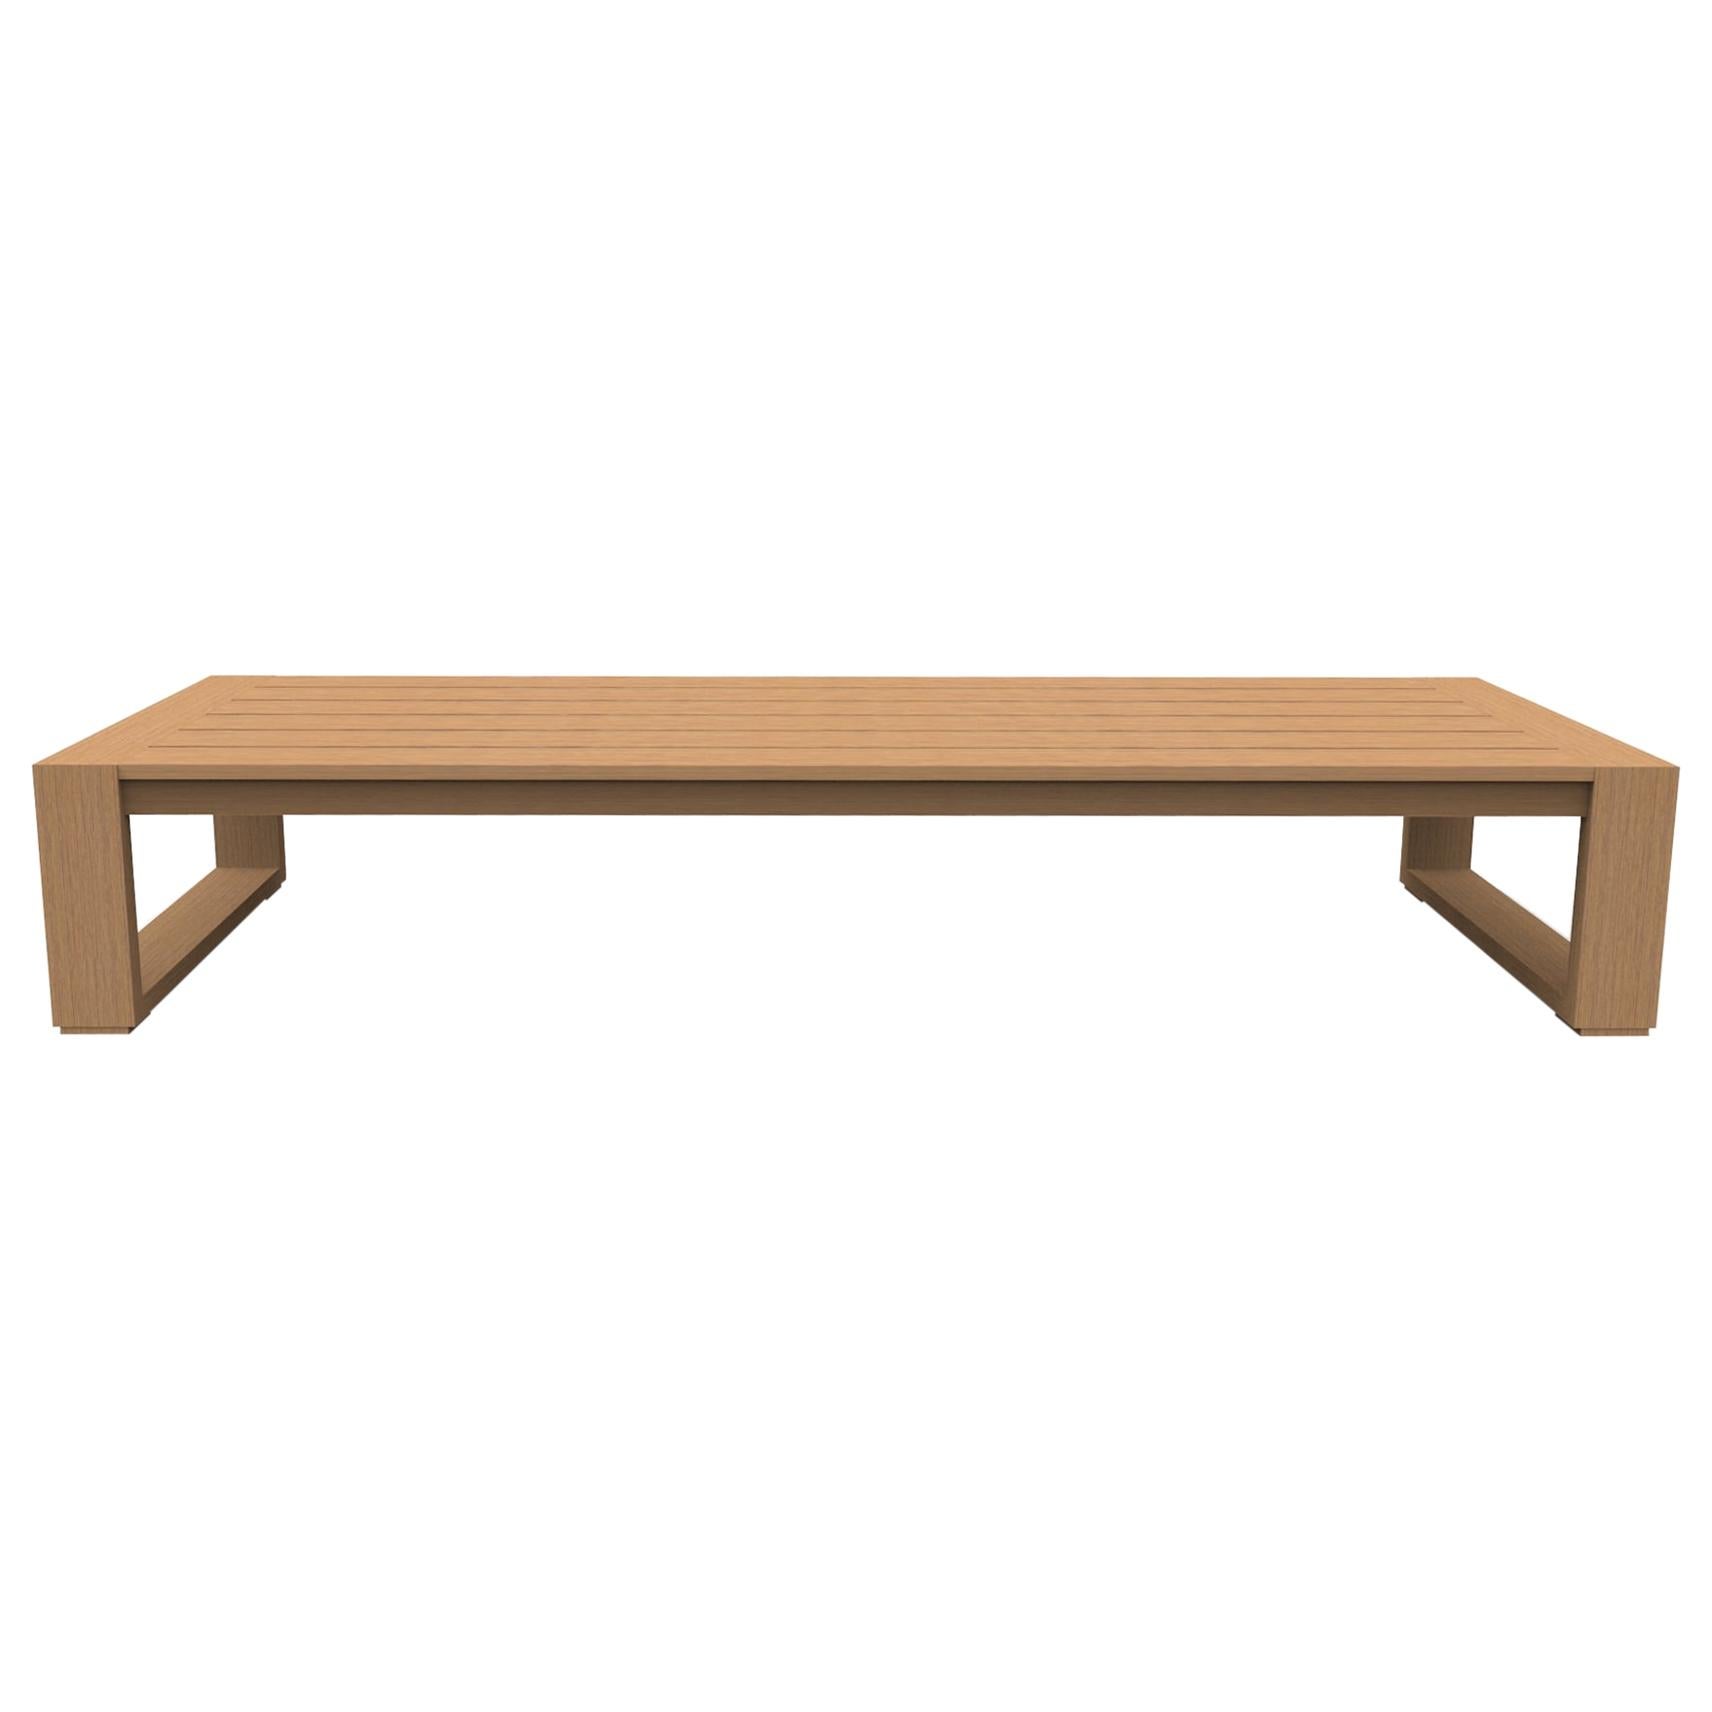 Brixton Teak Coffee Table 'Grade A' Wire Brushed Natural Wood For Sale